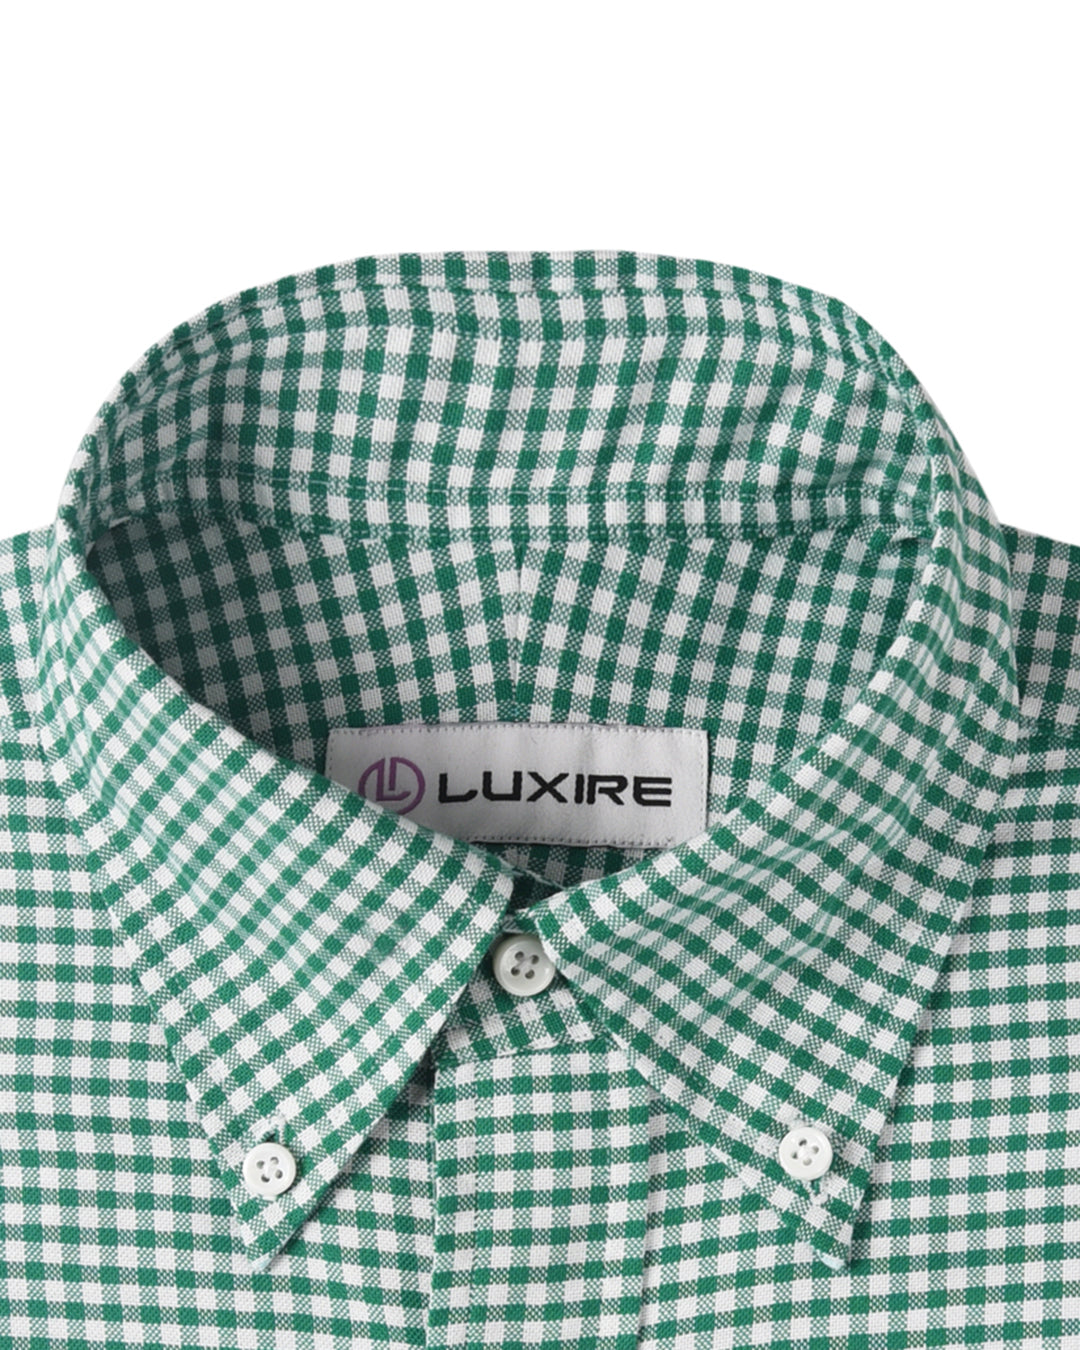 Oxford Lincoln Green Gingham on White